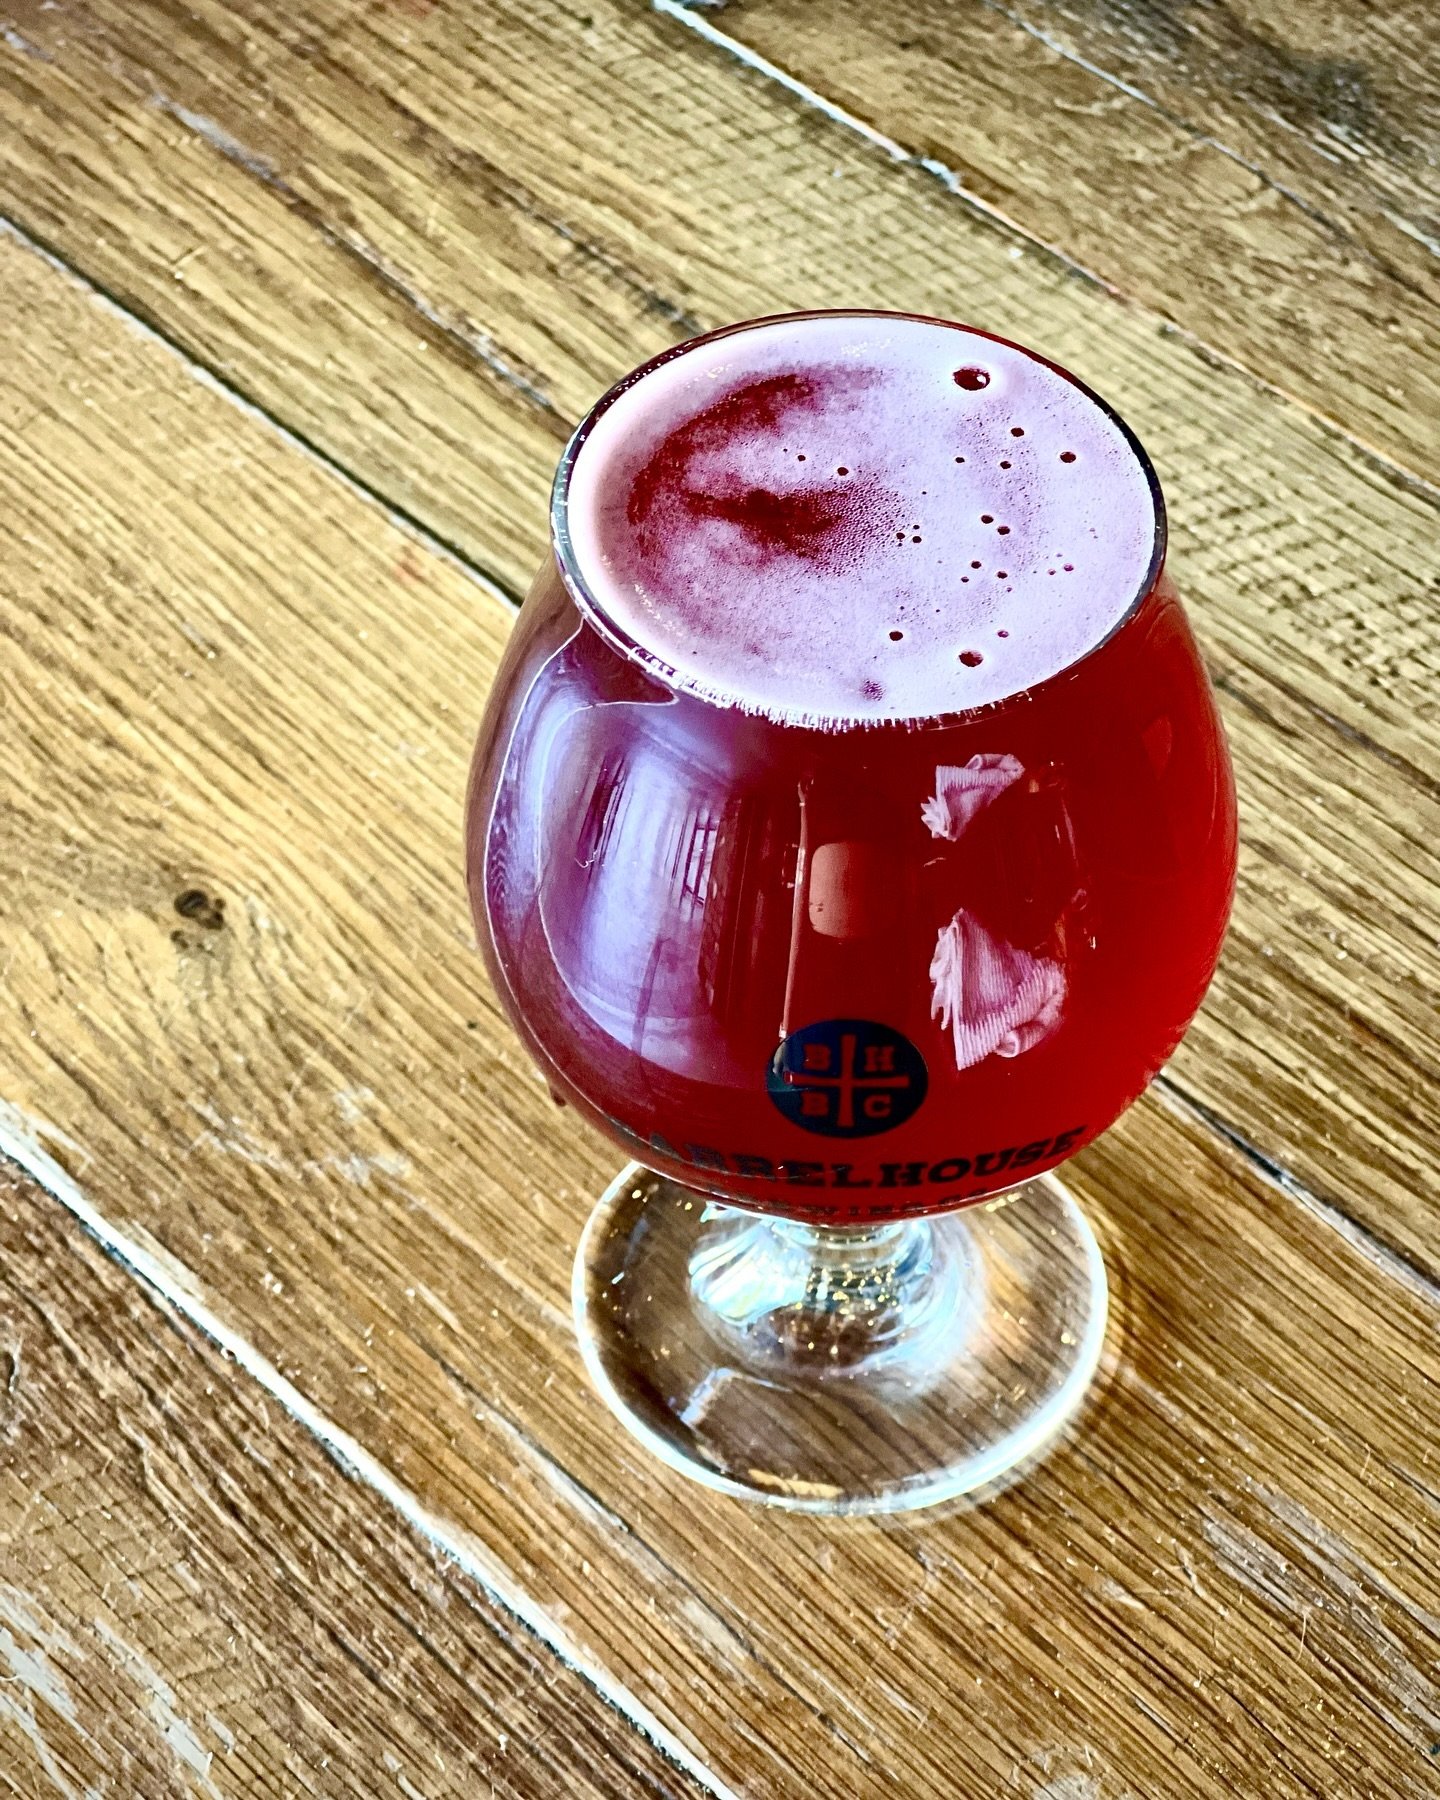 Zin City Zinfandel Sour 🍇
Back and Ready for Spring!
Try it out today! 
Open 11am - Midnight 
Live music by @jonathanfostermusic 
Cheers 🏹
#goodpeoplegoodtimesgreatbeer